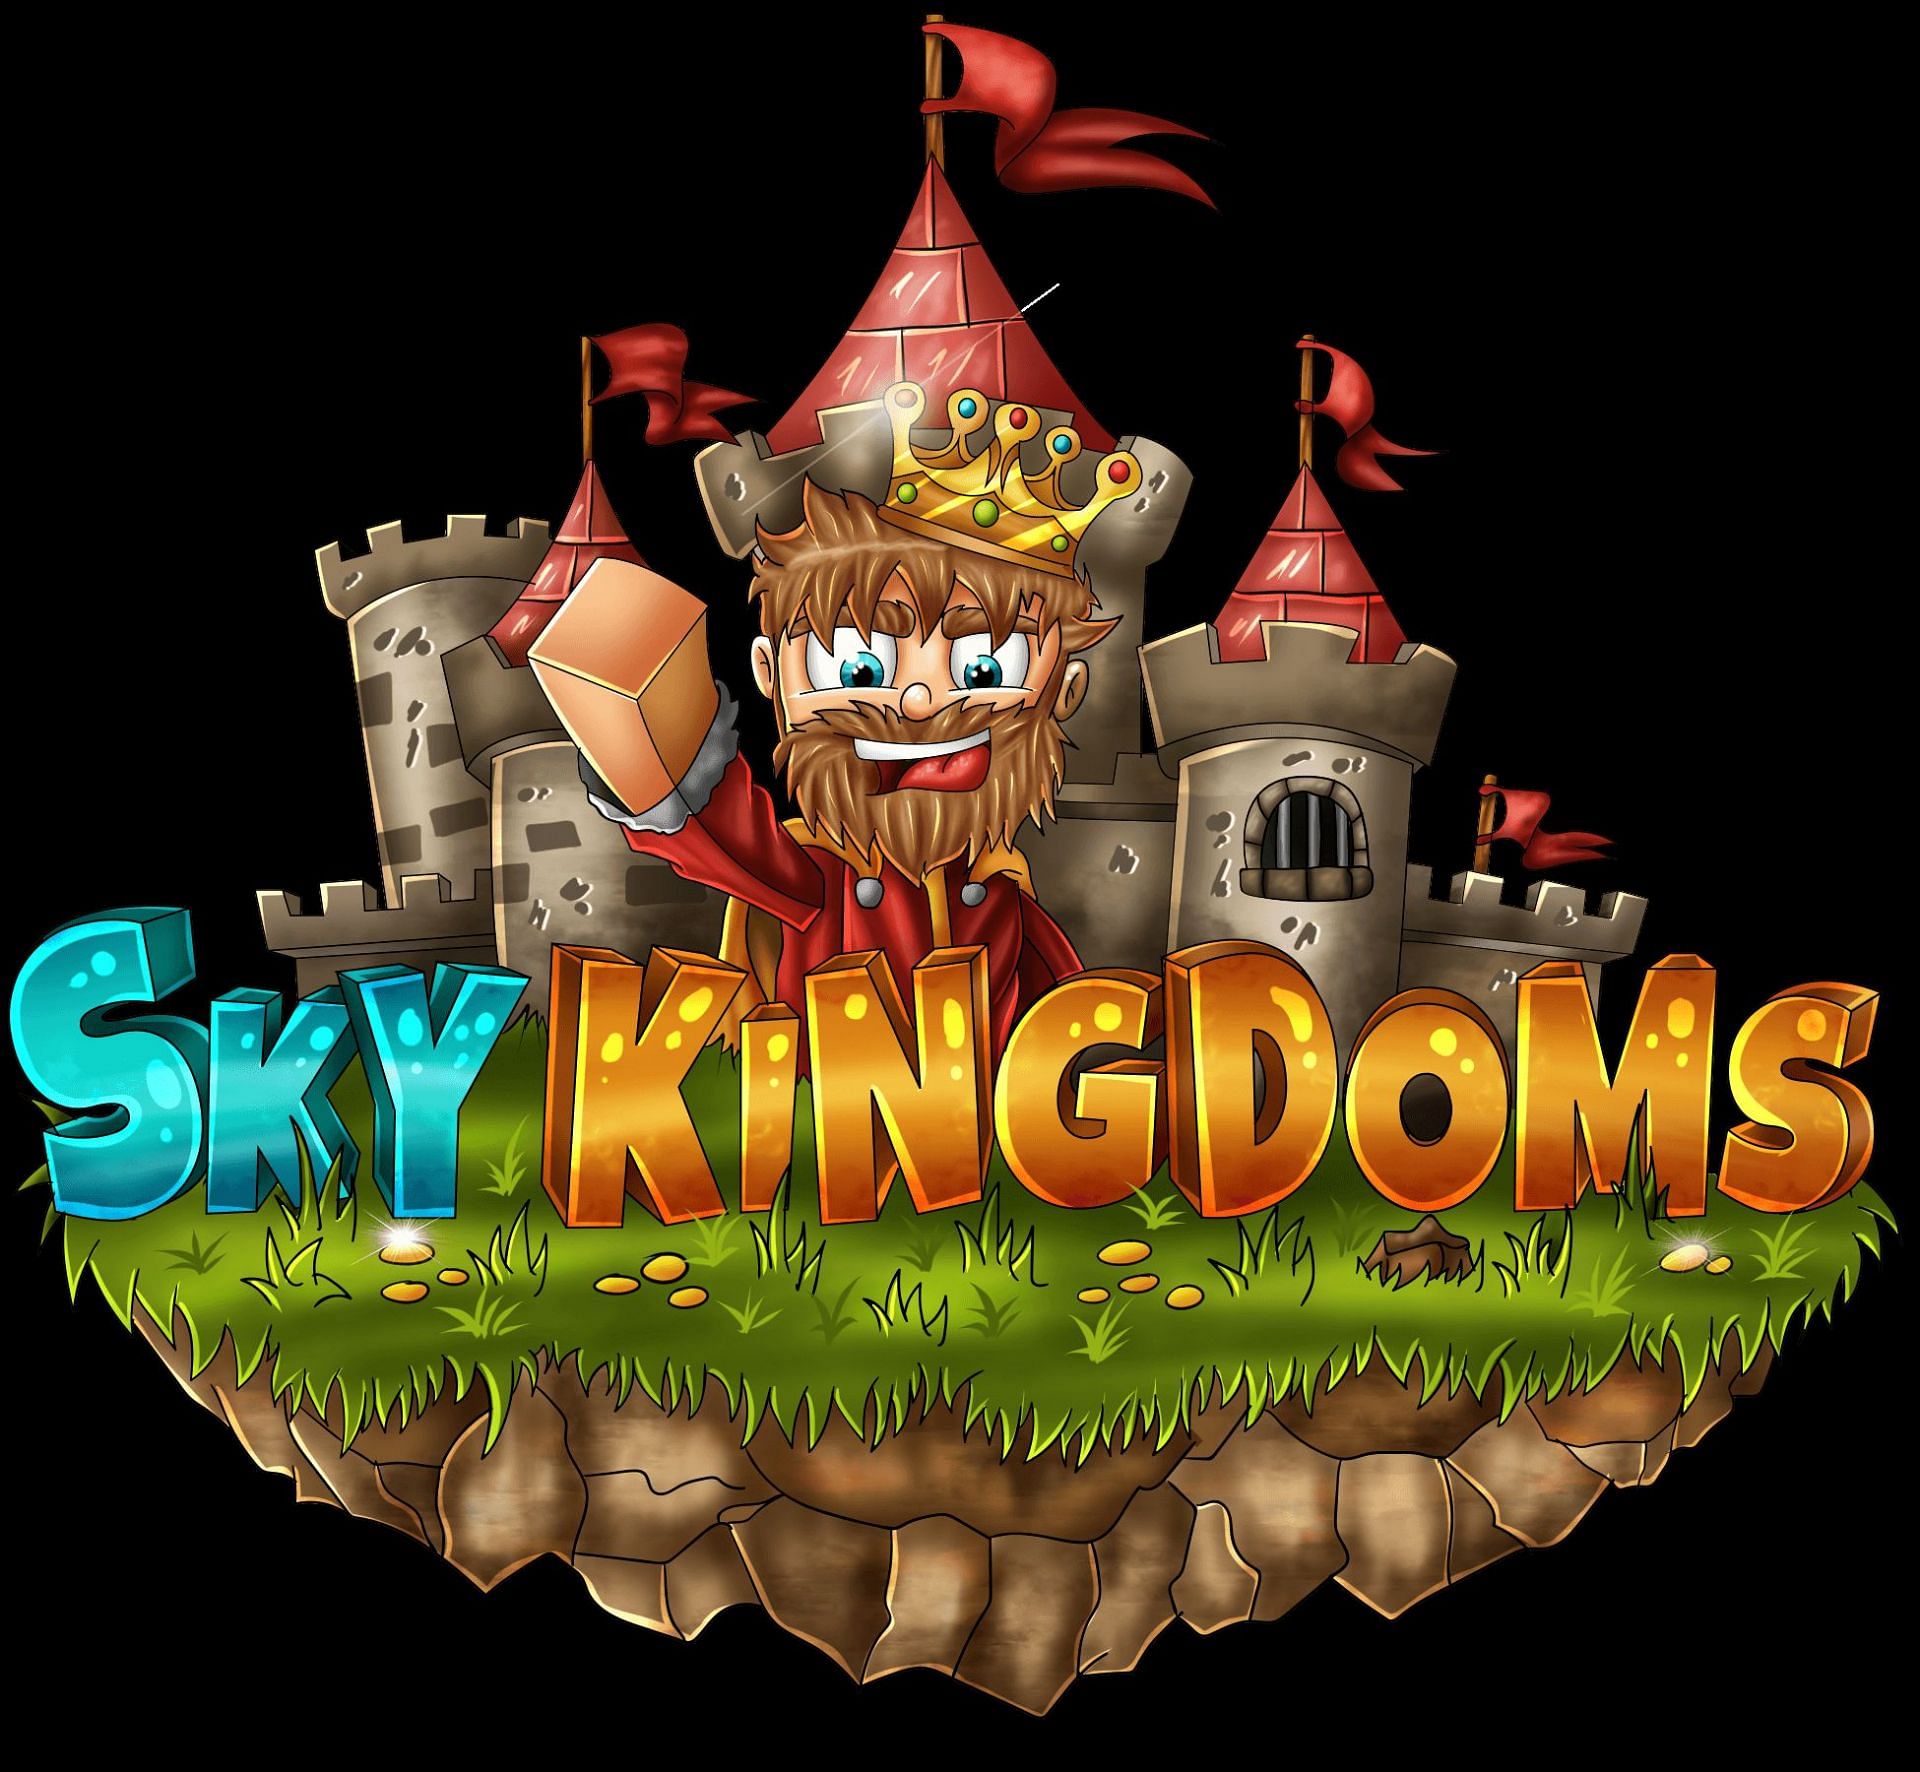 Sky Kingdoms is a very popular and very active Minecraft server that features multiple game modes in addition to Bedwars. (Image via skykingdoms.net)